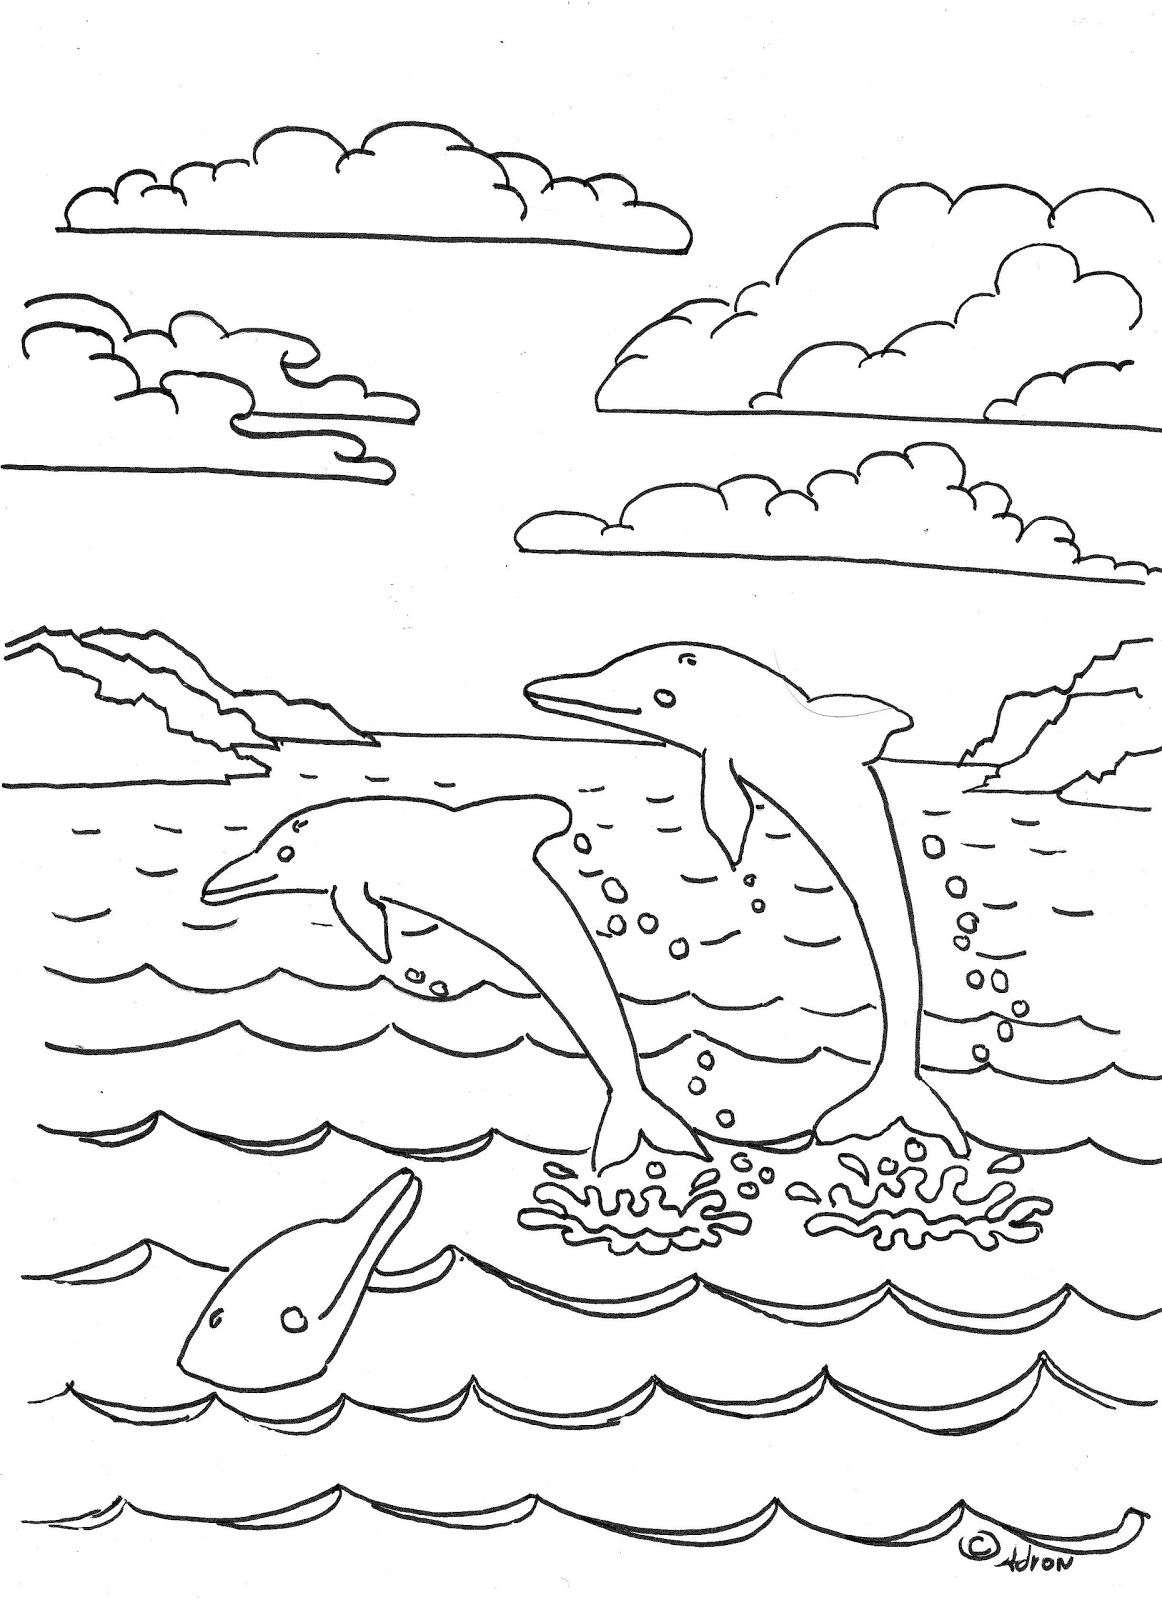 dolphin coloring printables dolphin coloring page adult coloring sheet nautical dolphin coloring printables 